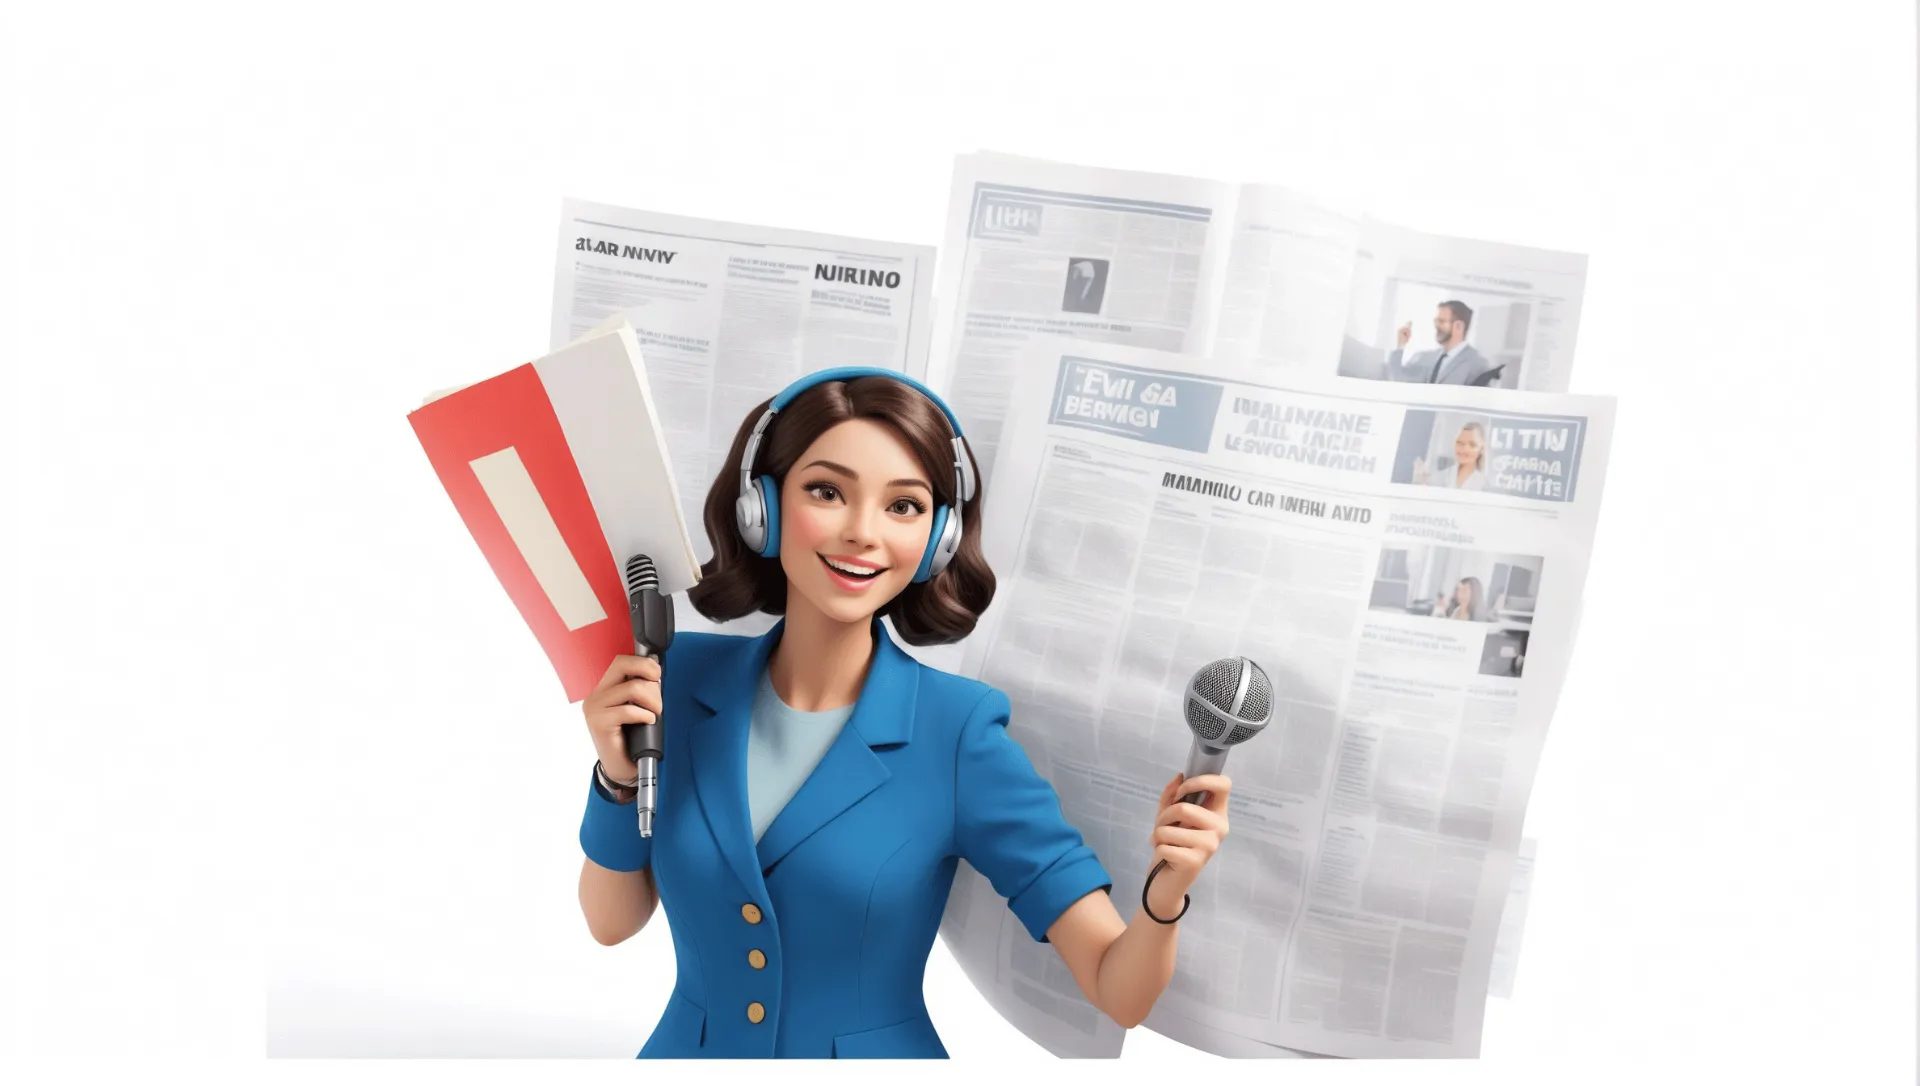 Female News Reporter with Mic 3D Design Character Illustration Template image